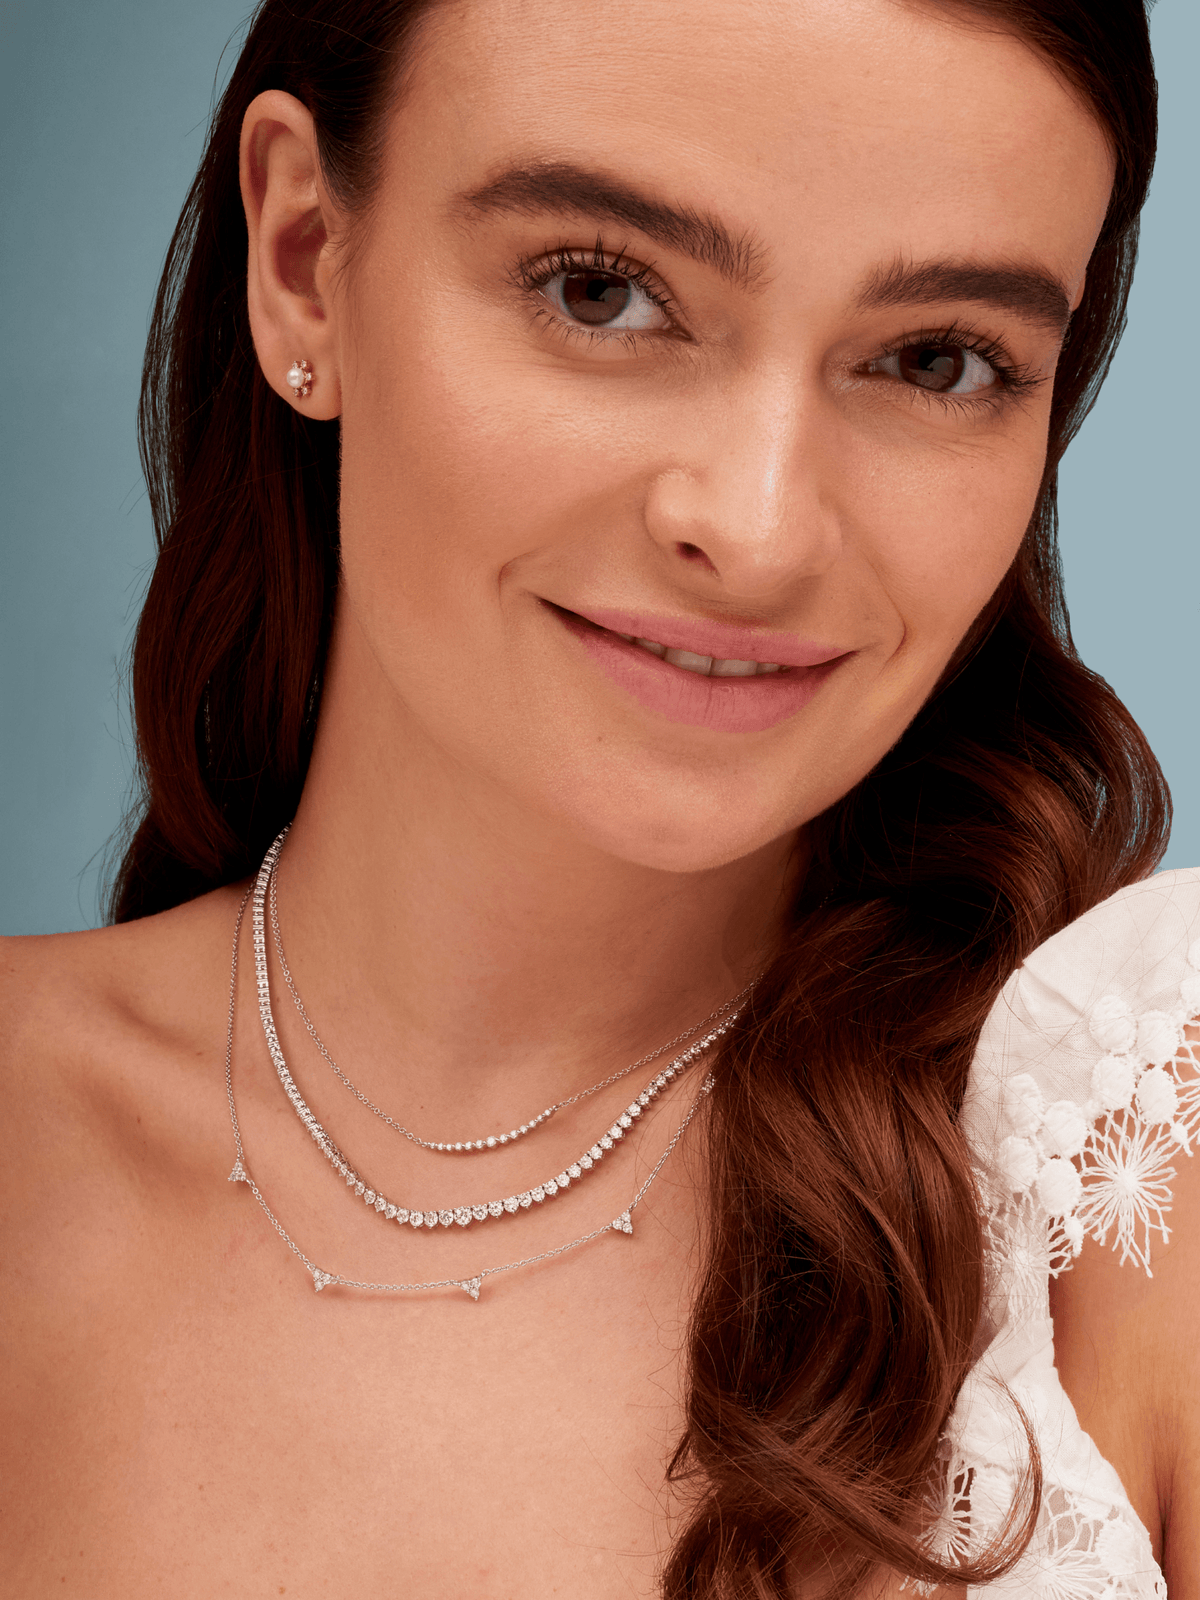 14K white gold diamond tennis necklace layered with chasing diamond necklace and diamond trio layering necklace